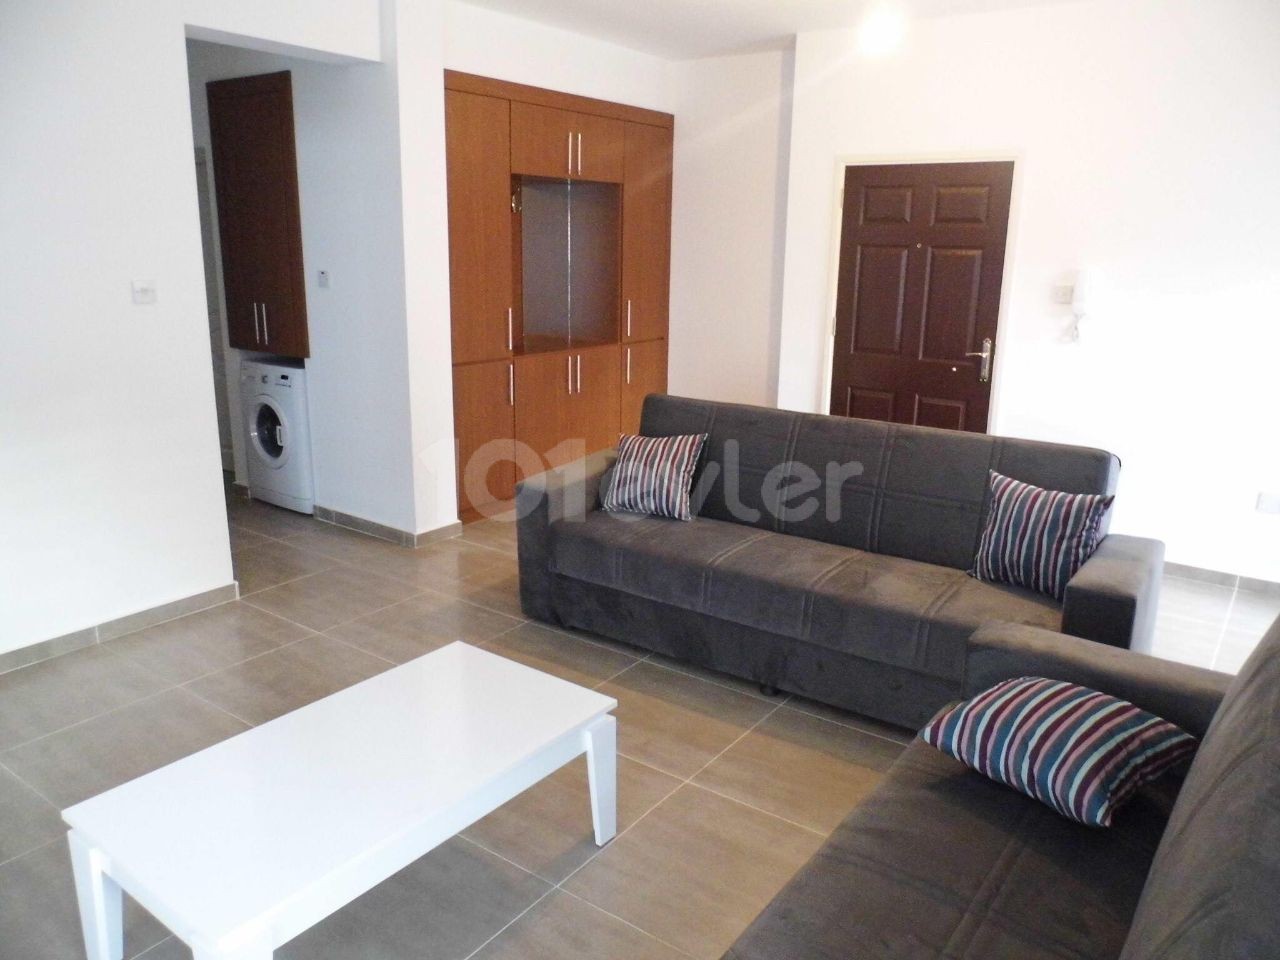 ✨IN THE HEART OF THE CITY ✨IN THE CENTRAL AREA OF THE CITY ✨IN THE AMPHITHEATER AREA OF THE AMPHITHEATER AREA OF THE CENTER OF THE CITY, TURKISH COBANLI TAXES VAT PAID FOR SALE 3 + 1 COSTLESS SPACIOUS SPACIOUS INVESTMENT APARTMENT✨✨✨